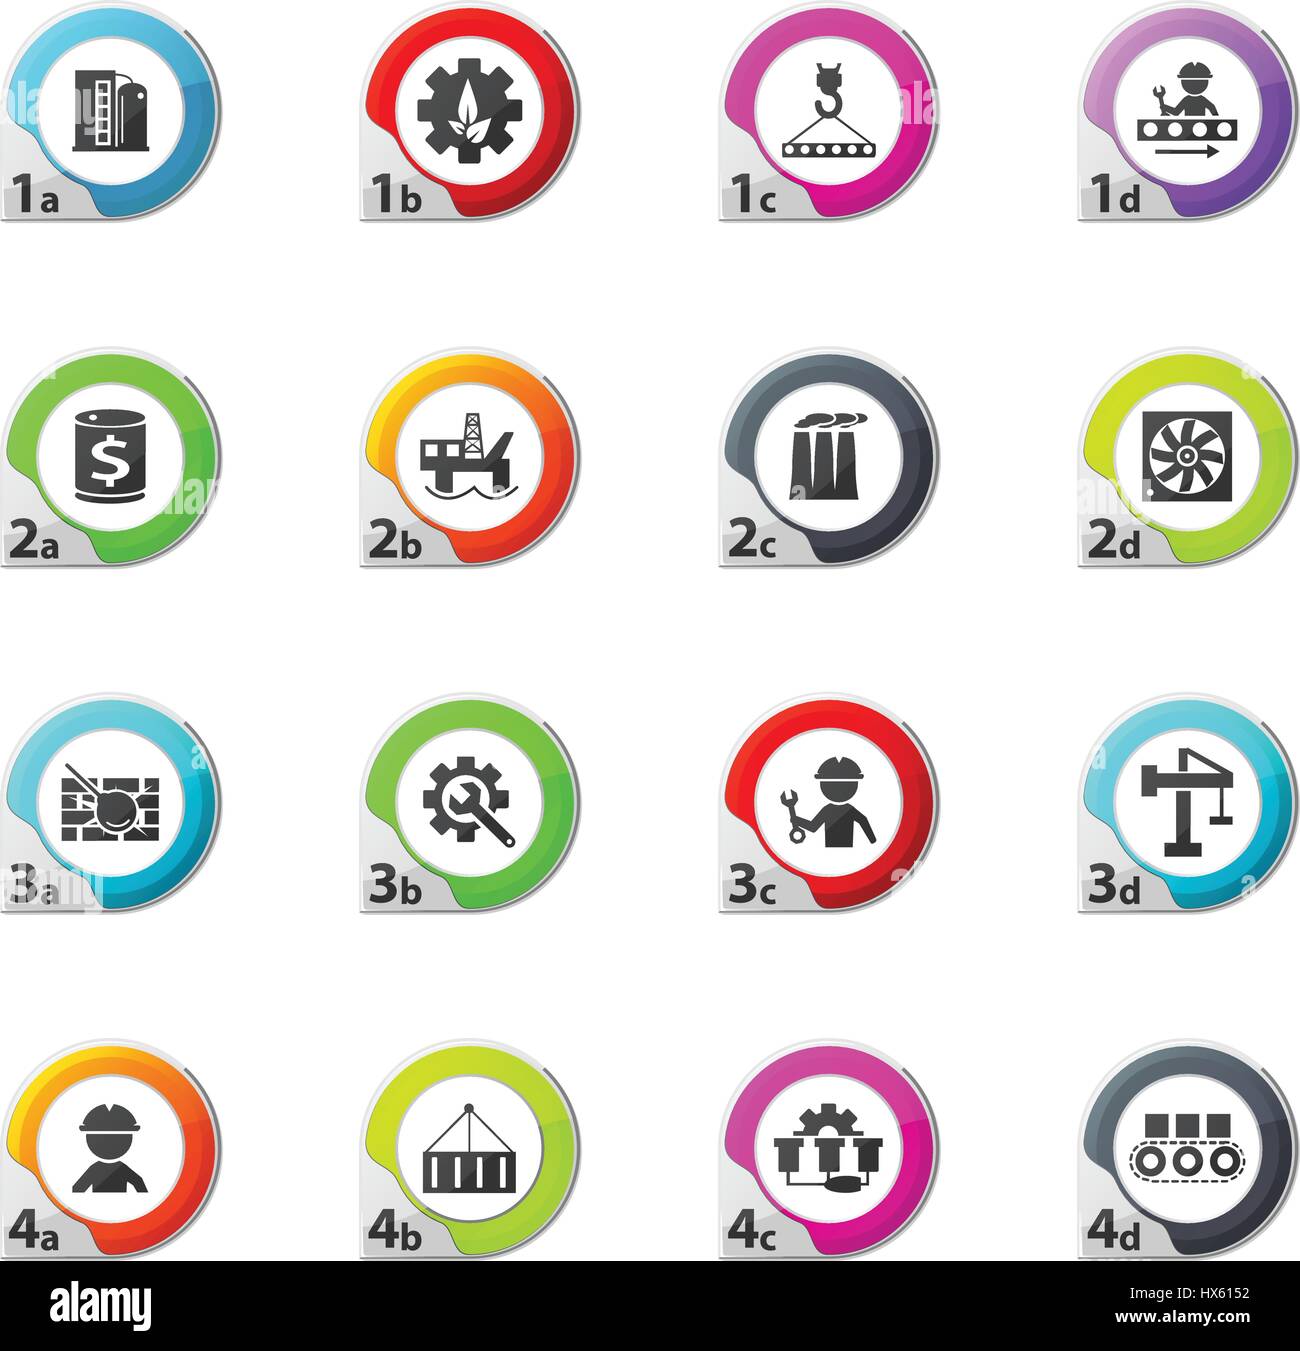 industry web icons for user interface design Stock Vector